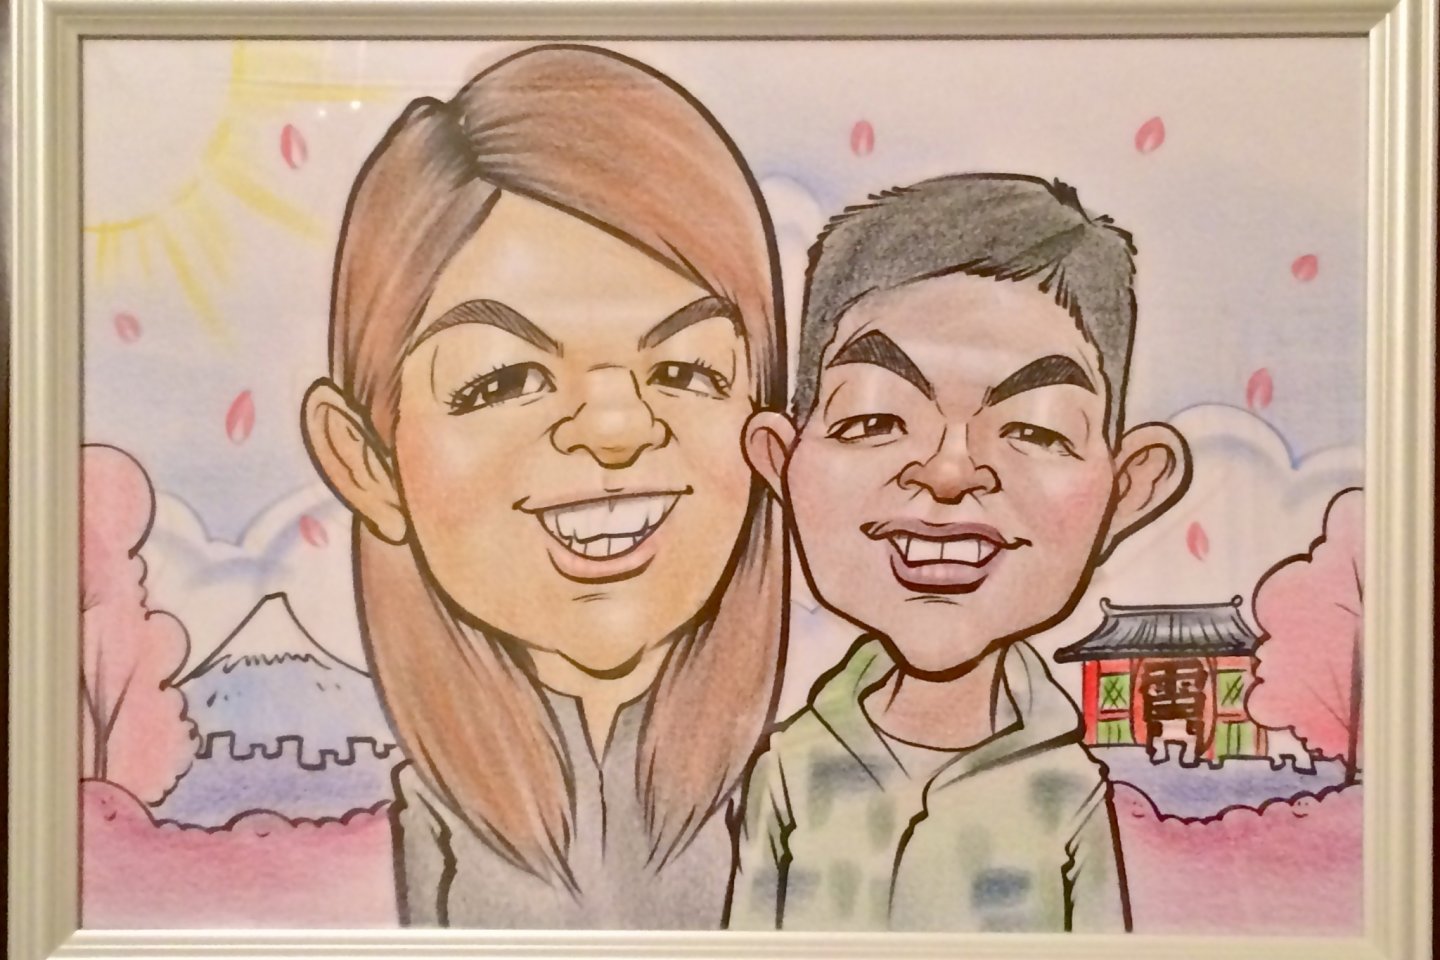 The finished product. Our caricature selection was a Quick Type in Color, with Background and Framed. We love it!